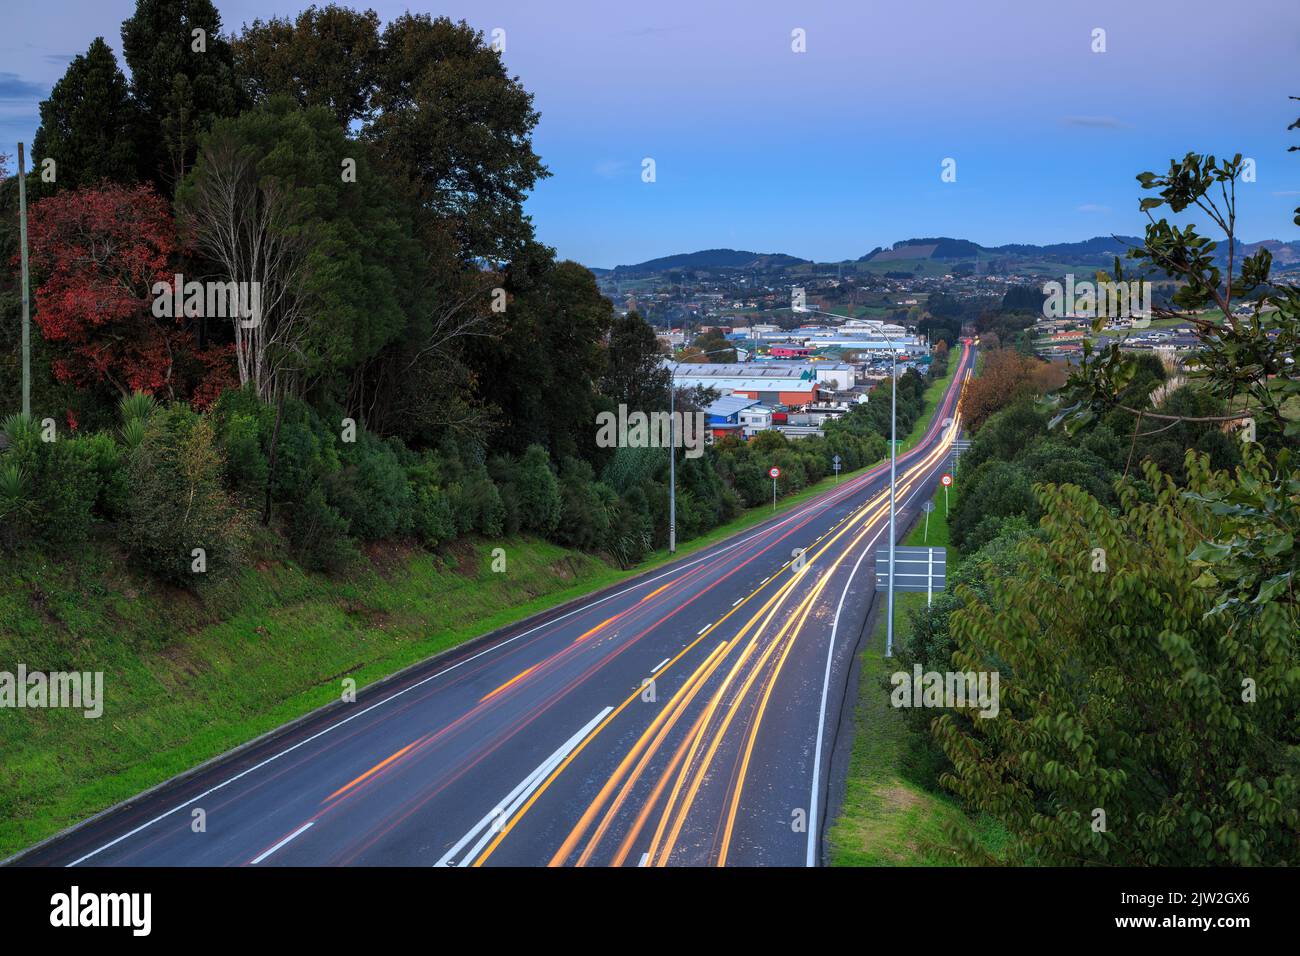 The light trails of cars heading home from work at dusk. Tauranga, New Zealand Stock Photo